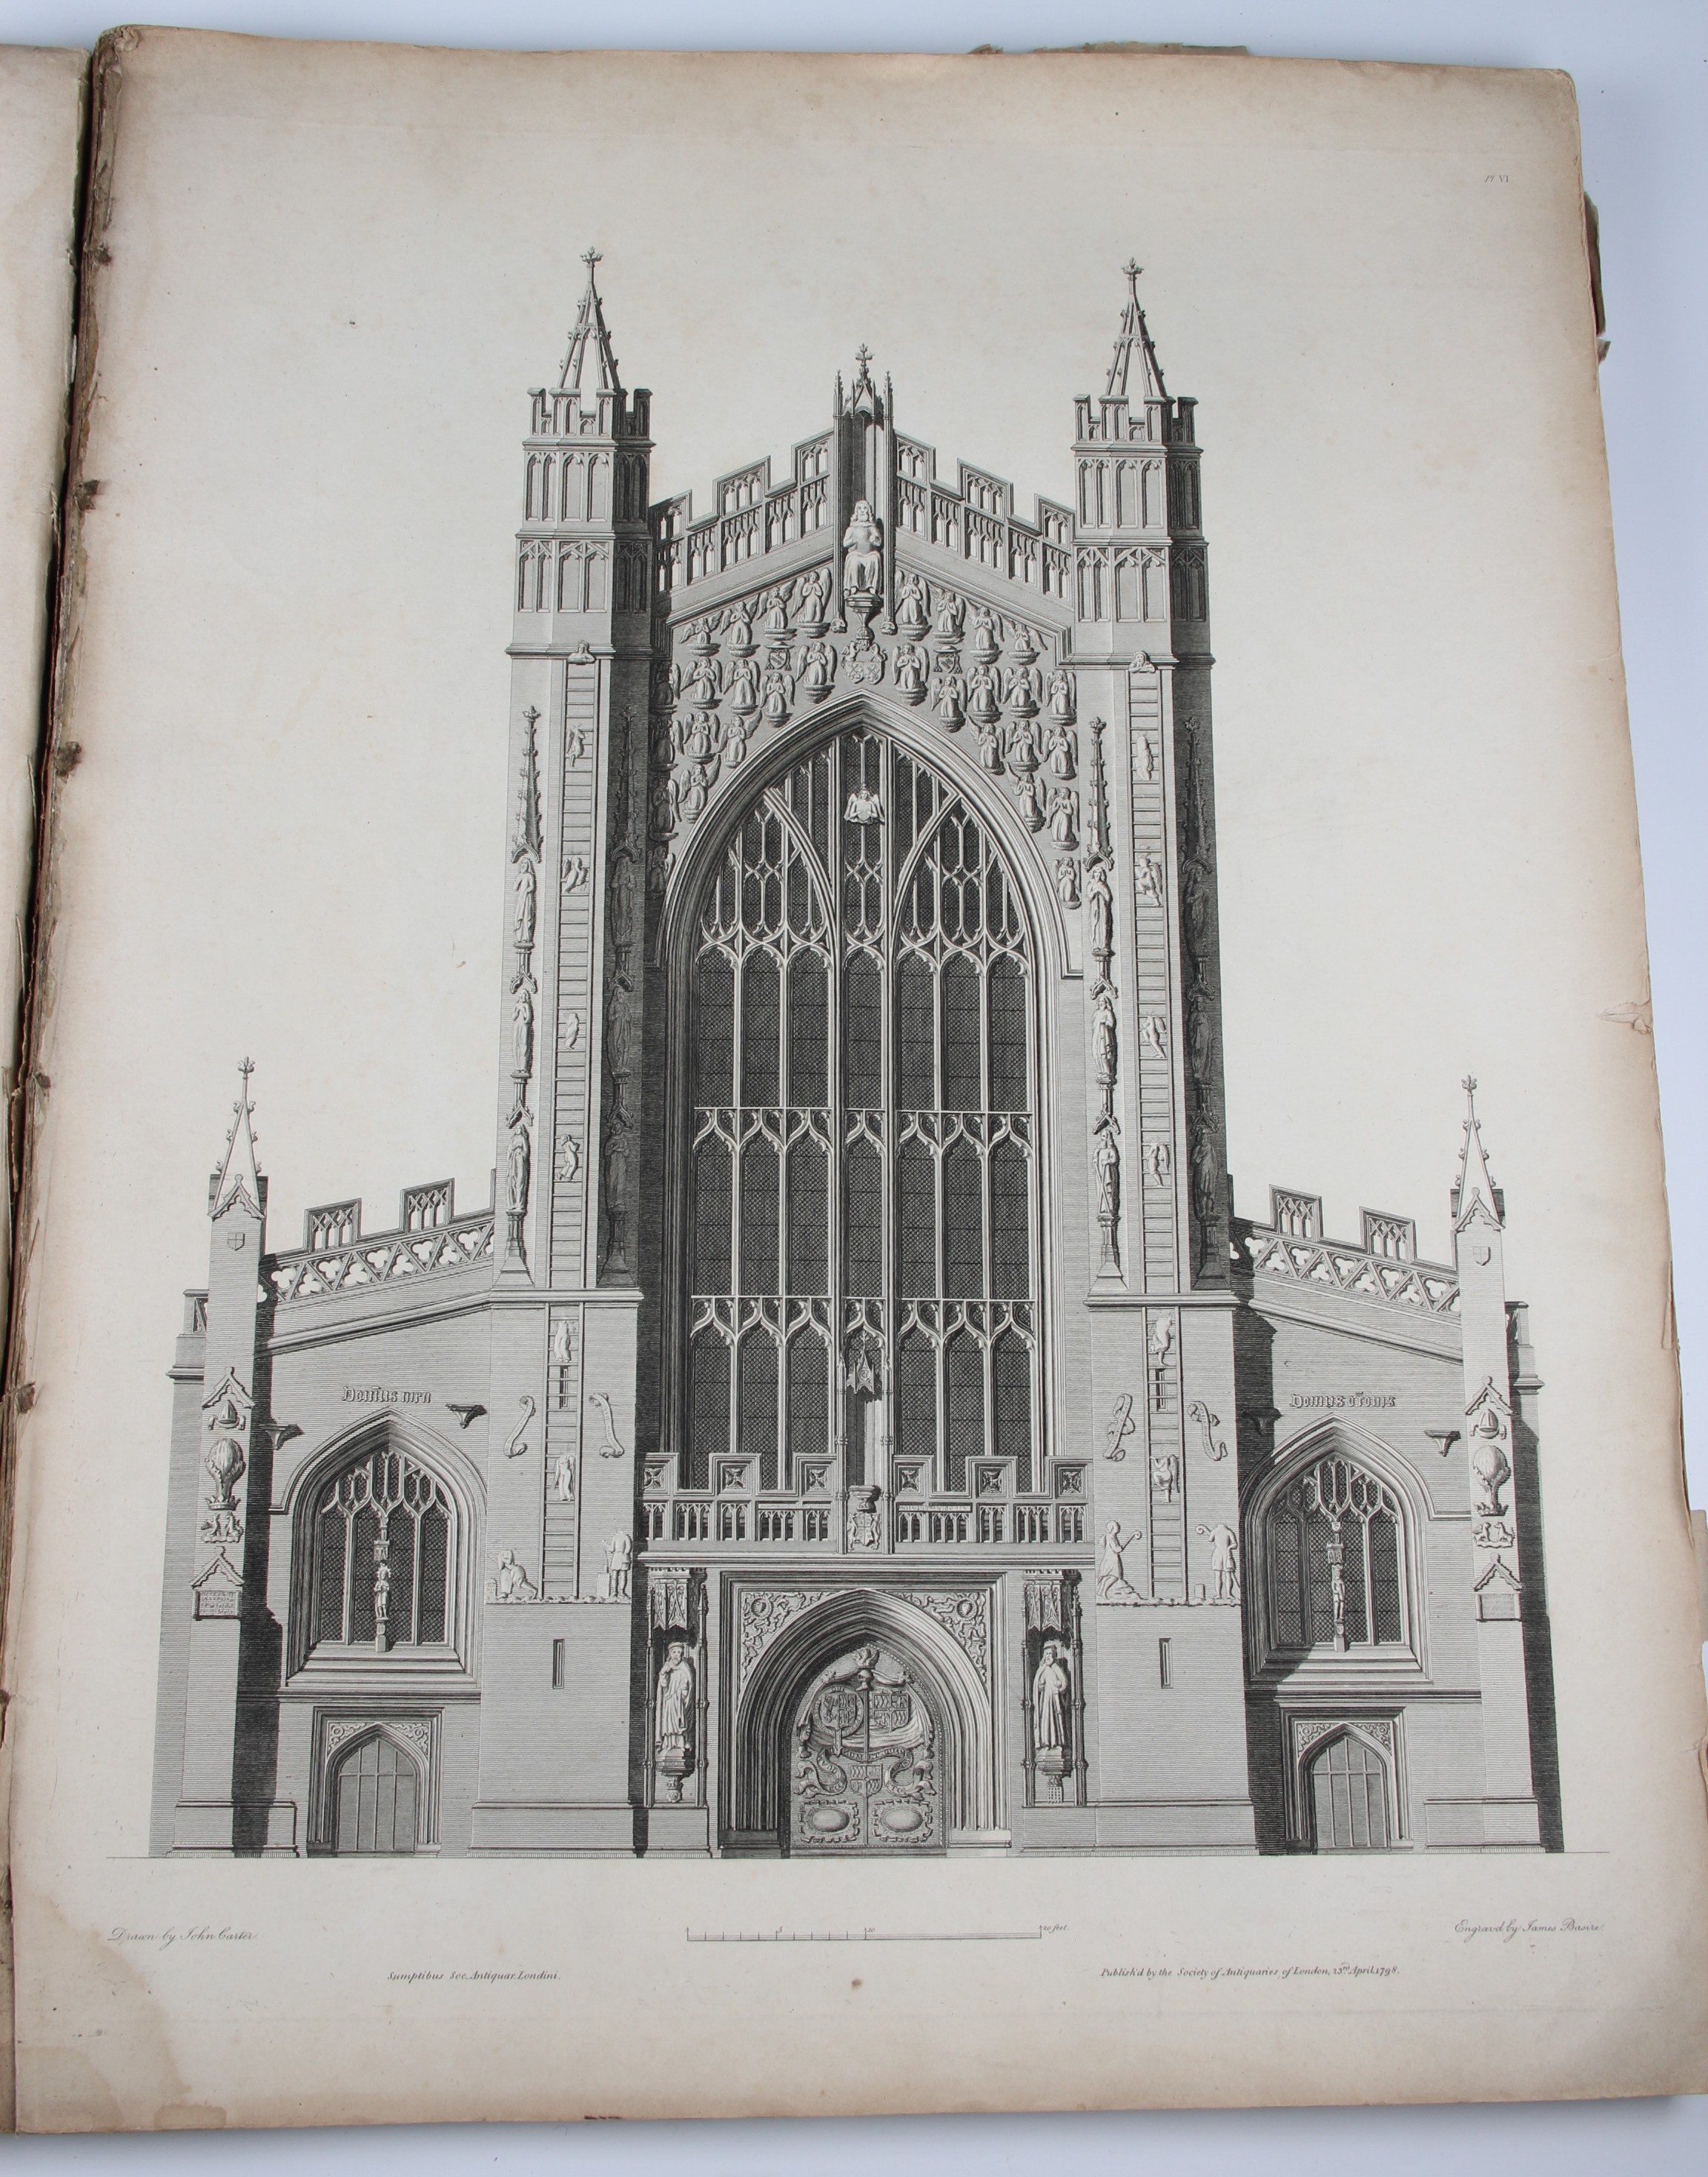 A volume of large format prints, Plans, Elevations, and Sections of Bath Abbey, published 23rd